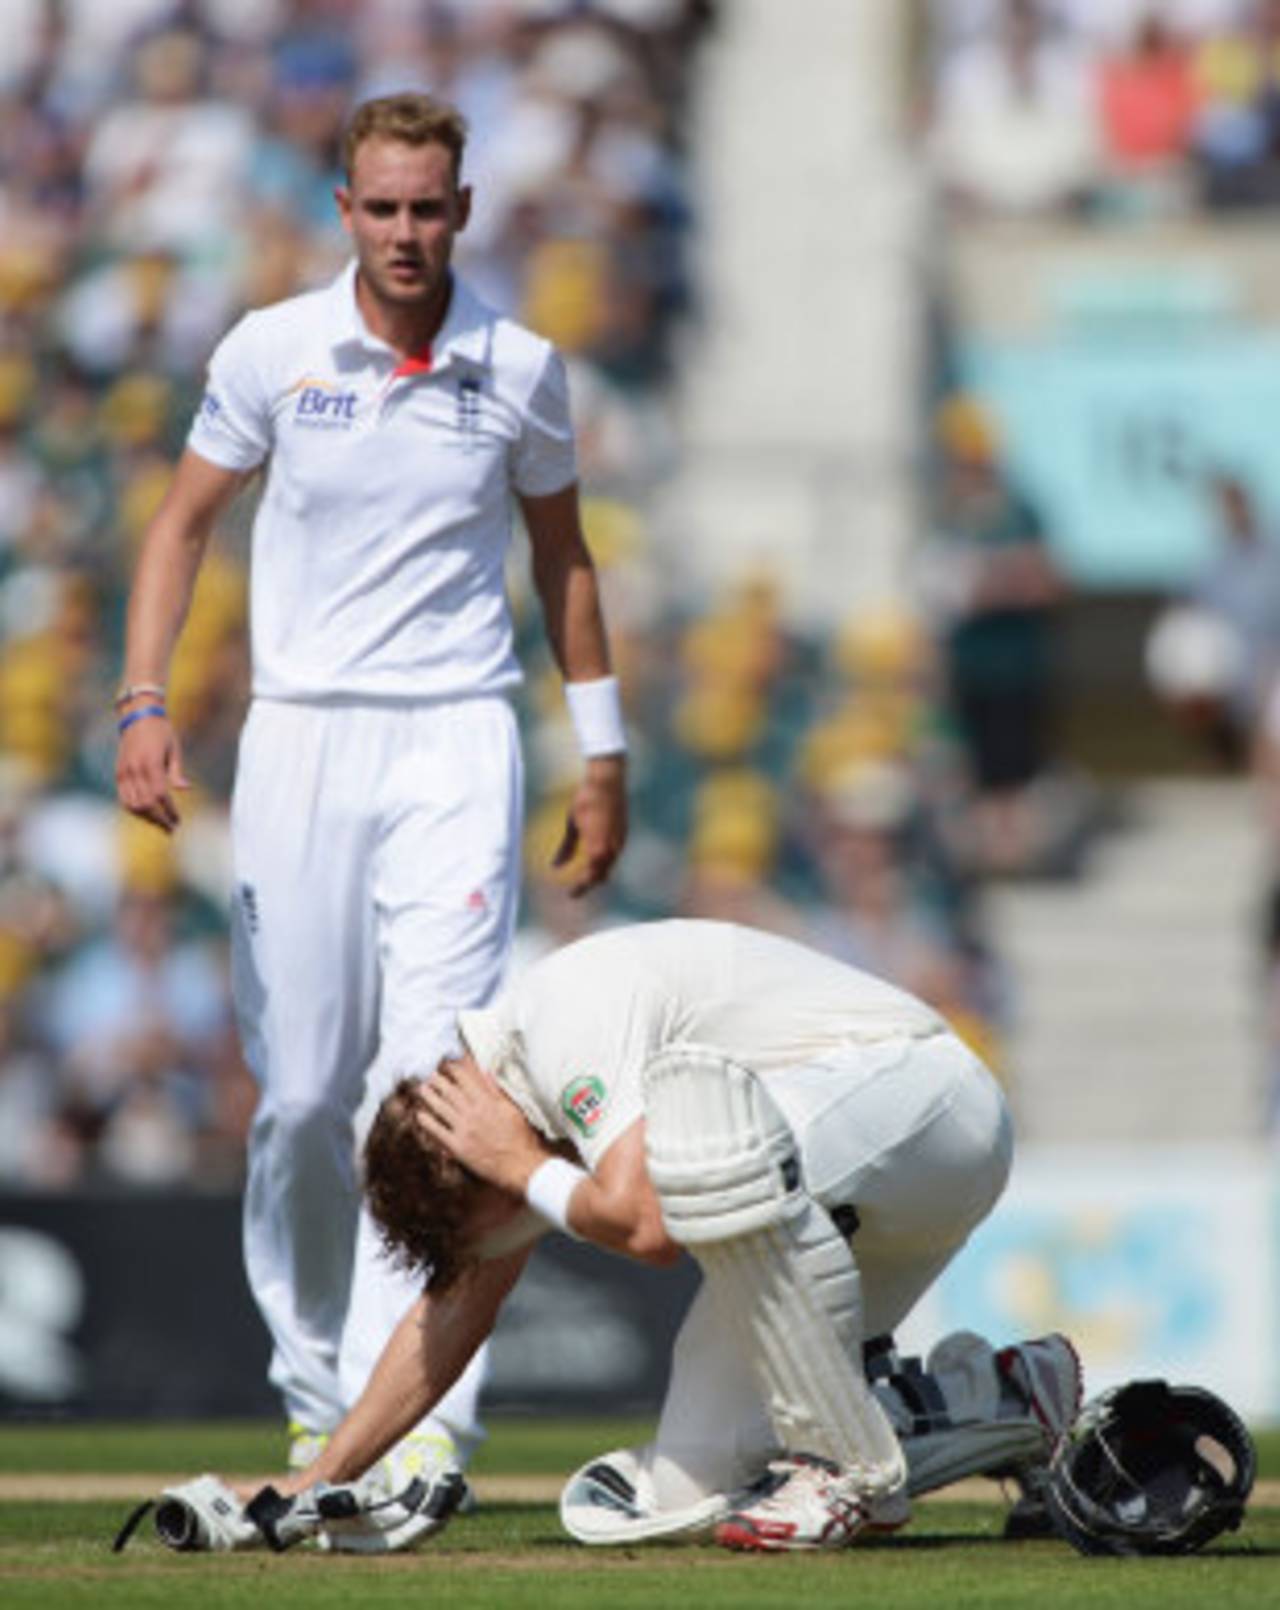 Stuart Broad struck Shane Watson a painful blow on the head, England v Australia, 5th Investec Test, The Oval, 1st day, August 21, 2013